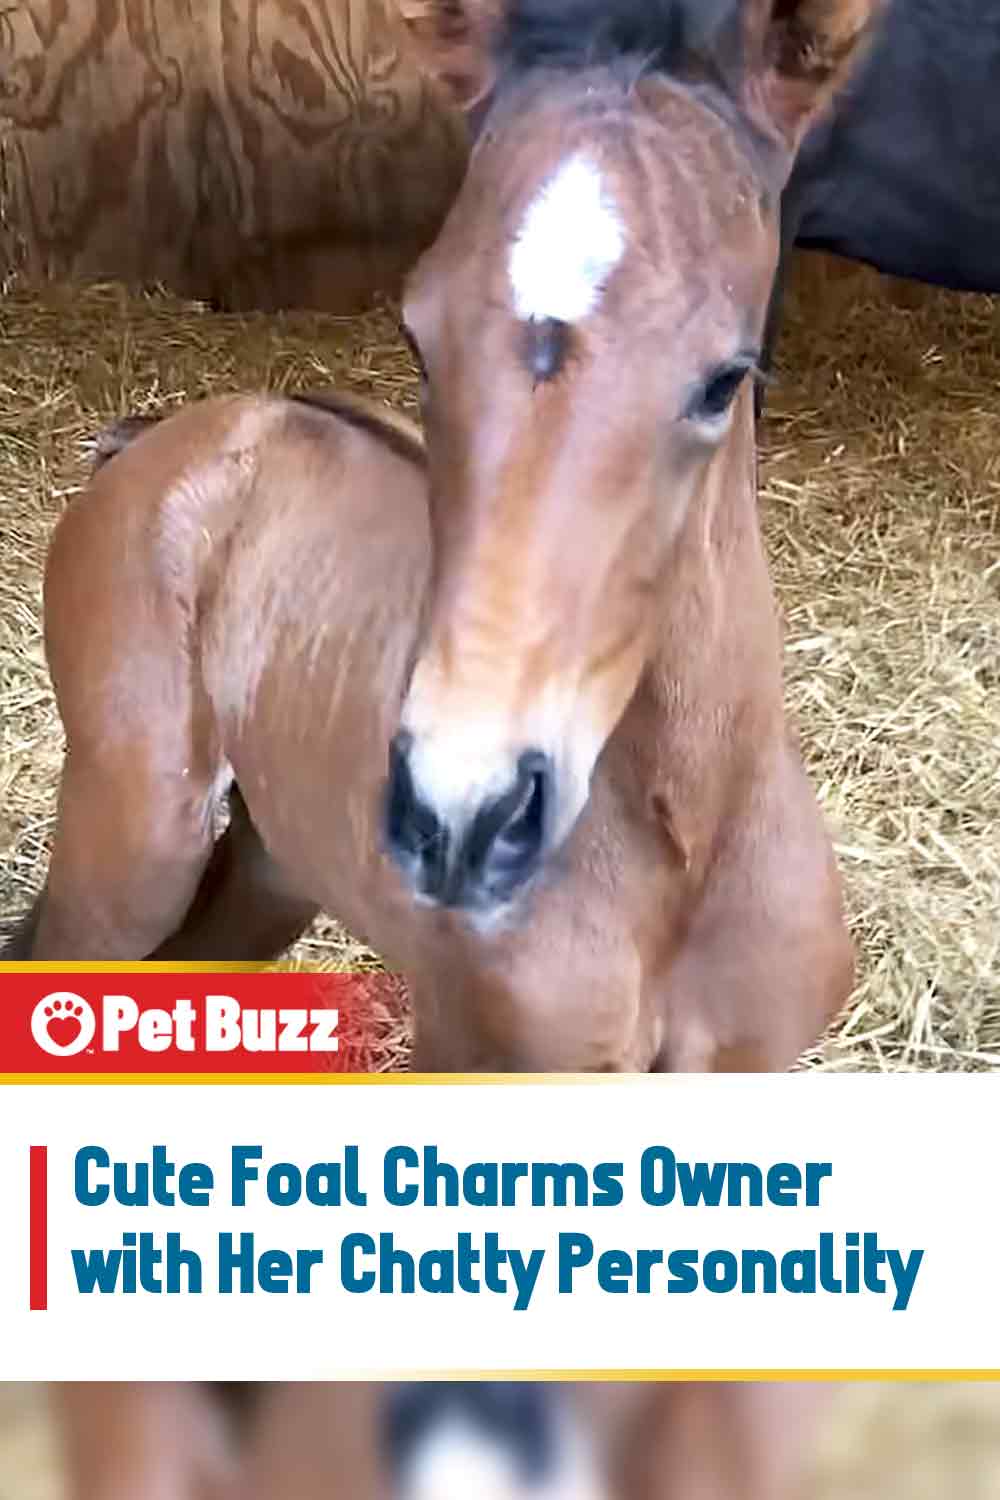 Cute Foal Charms Owner with Her Chatty Personality